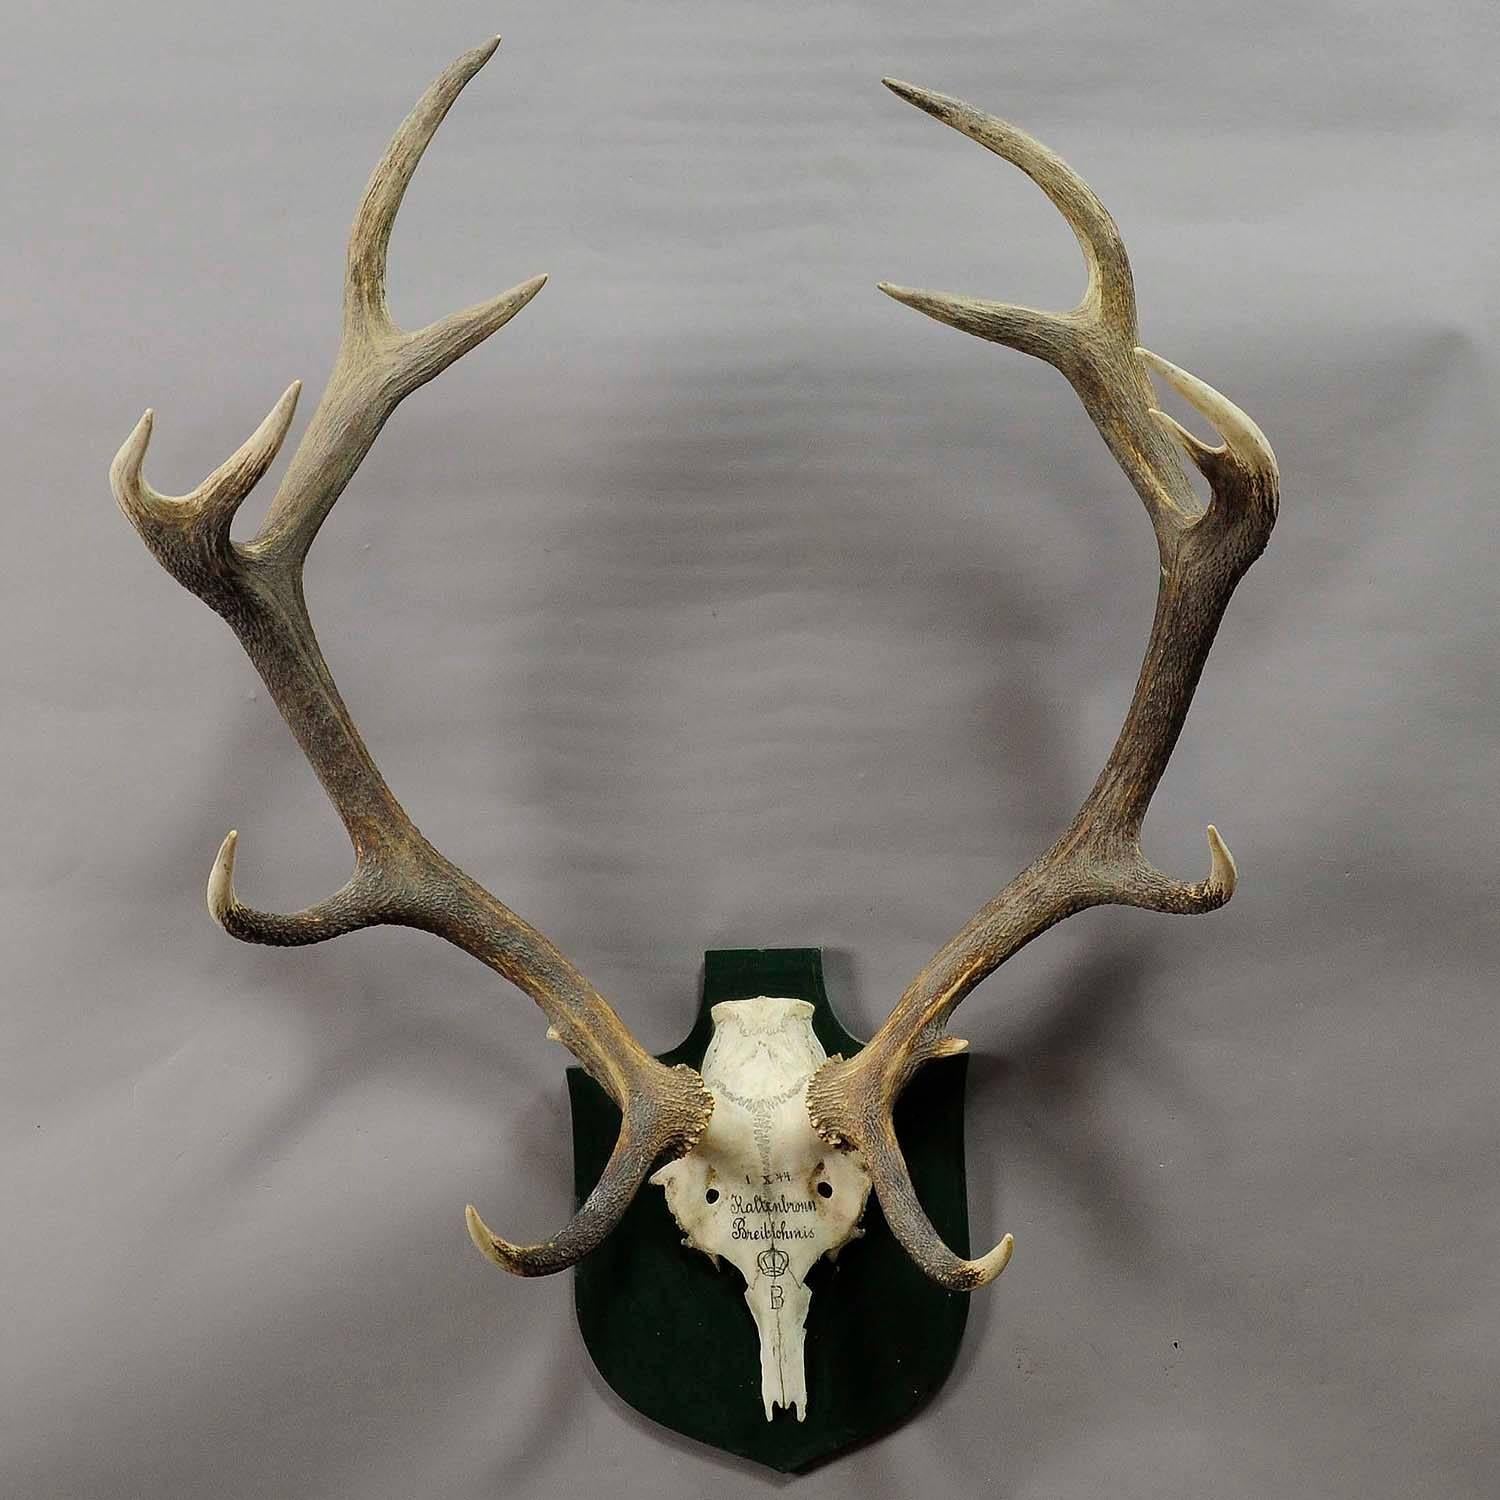 A great 14 pointer black forest deer trophy from the palace of Salem in south Germany. Shoot by a member of the lordly family of Badenin, 1944. Handwritten inscriptions on the skull with, place of the hunt and date 1944. Mounted on a wooden plaque,